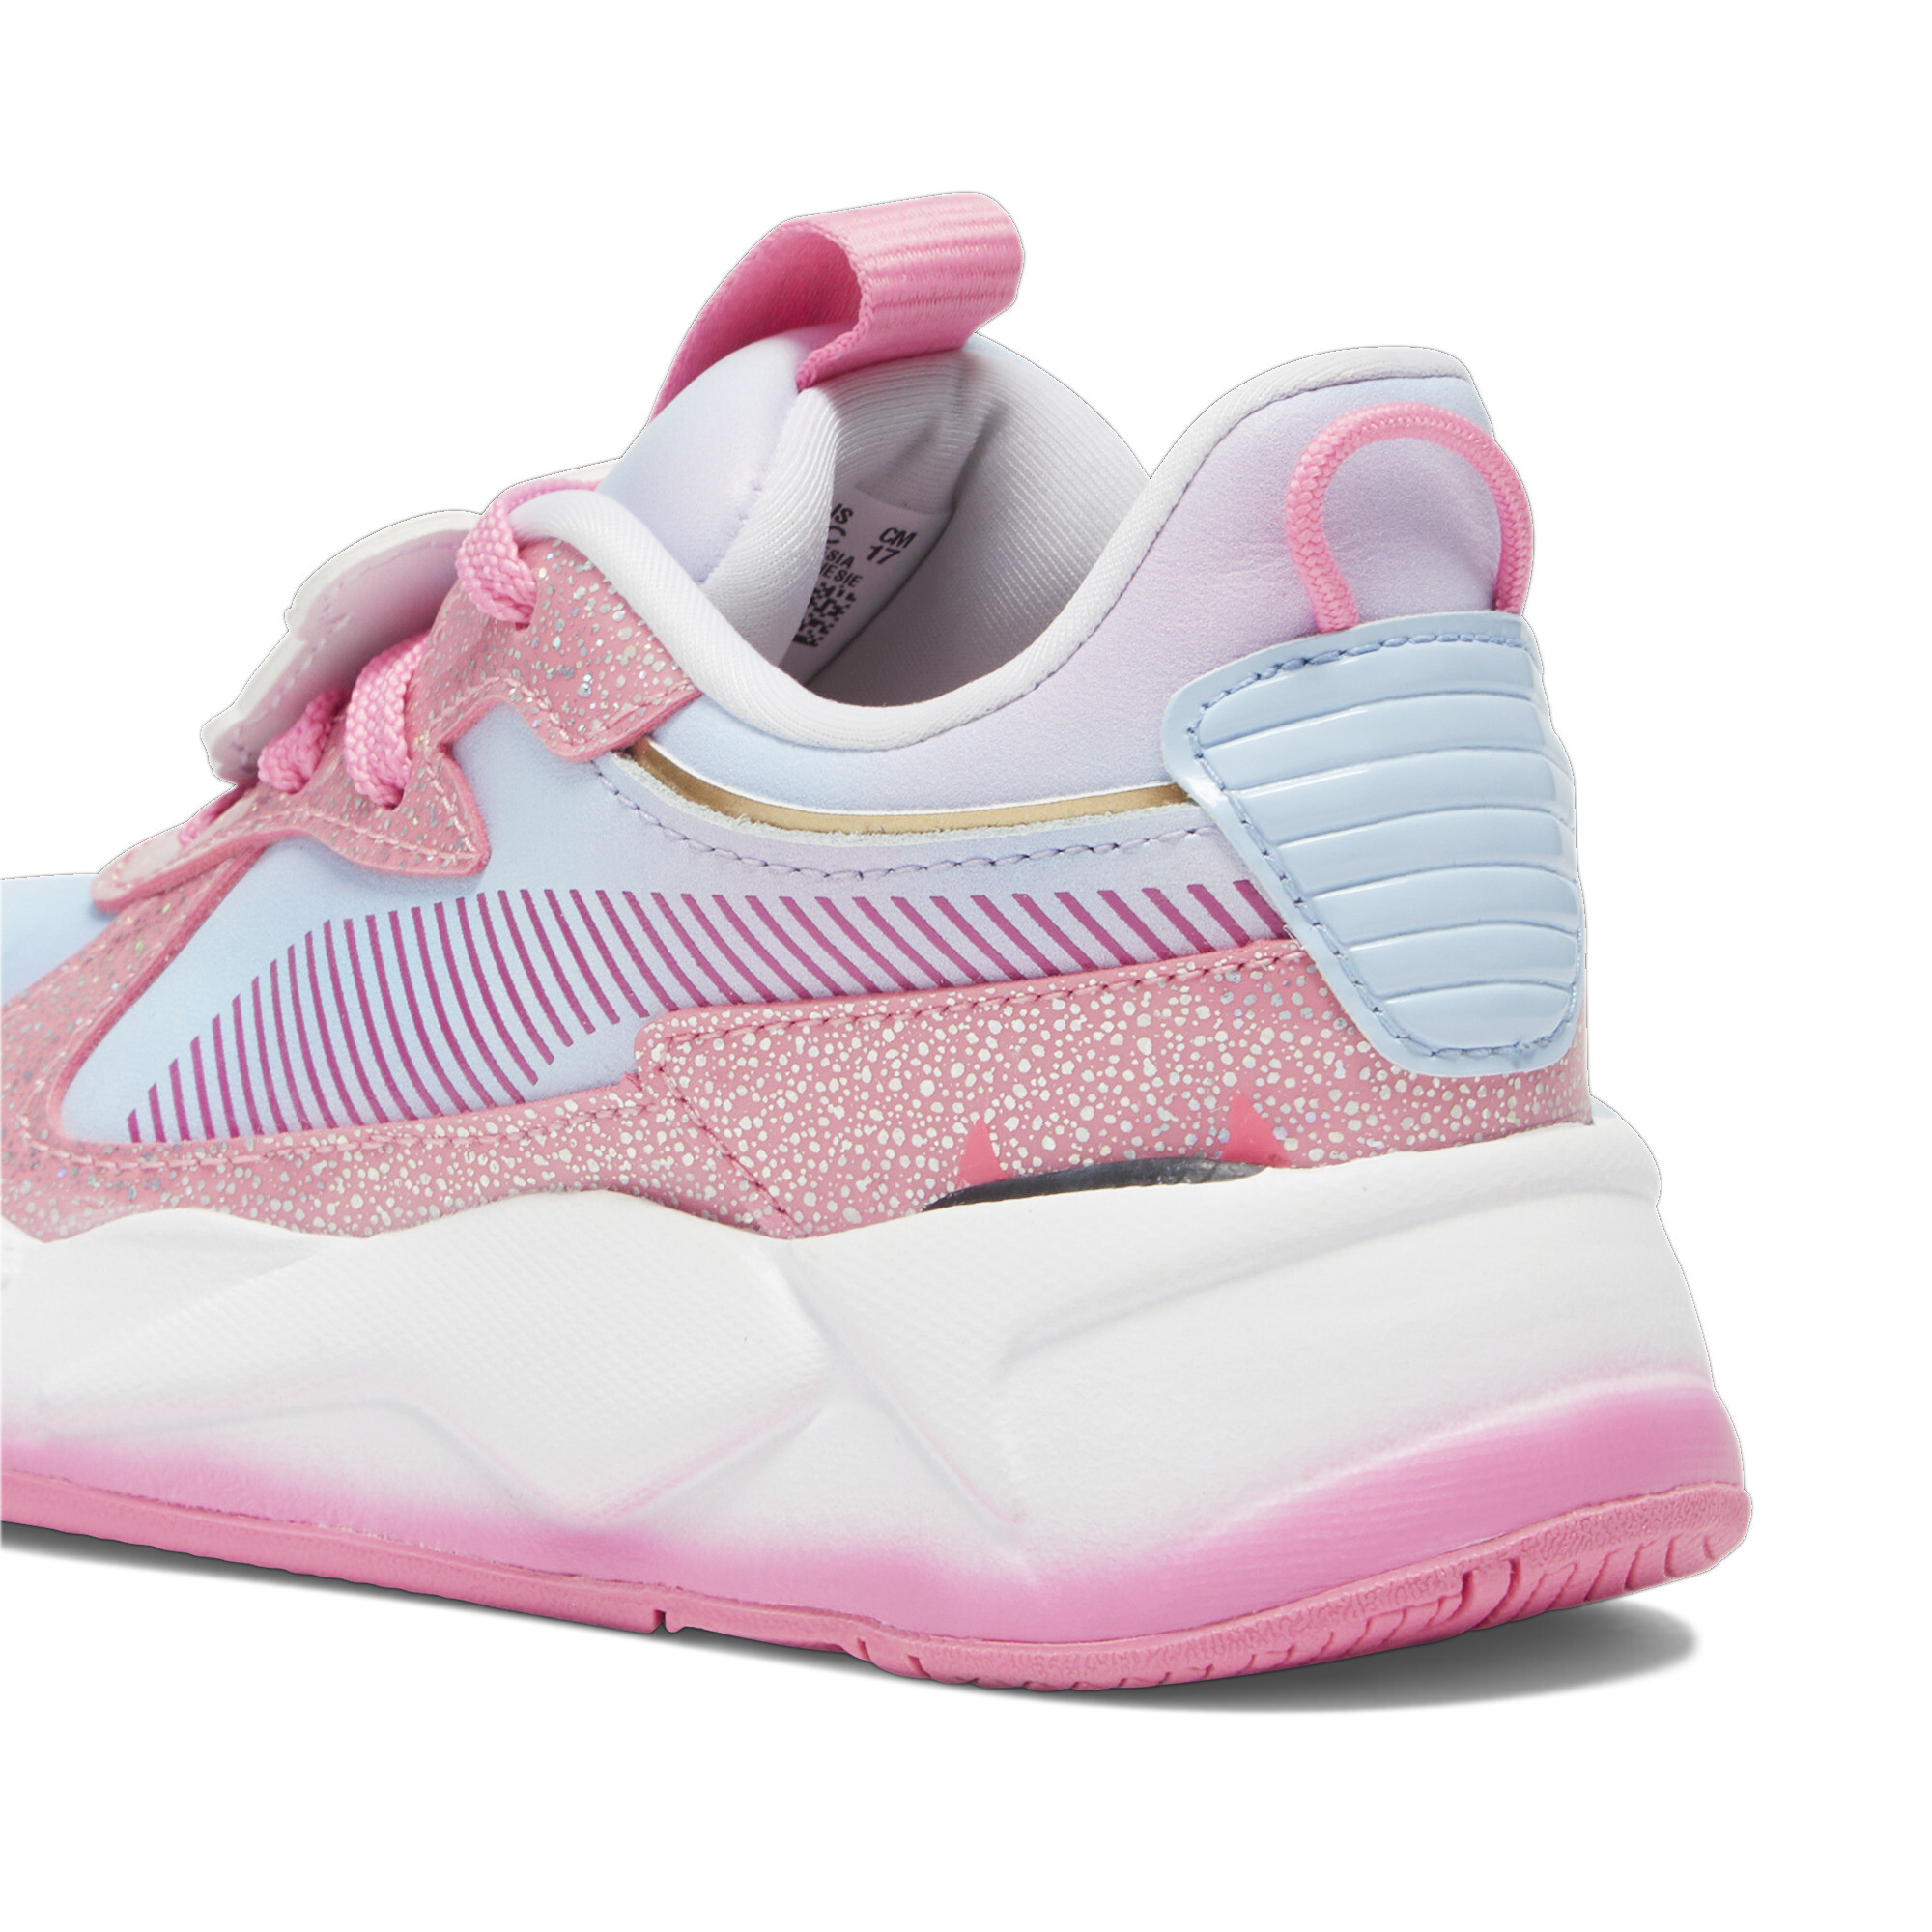 Puma X LOL SURPRISE RS-X Kids' Sneakers, Pink, Size 32.5, Shoes